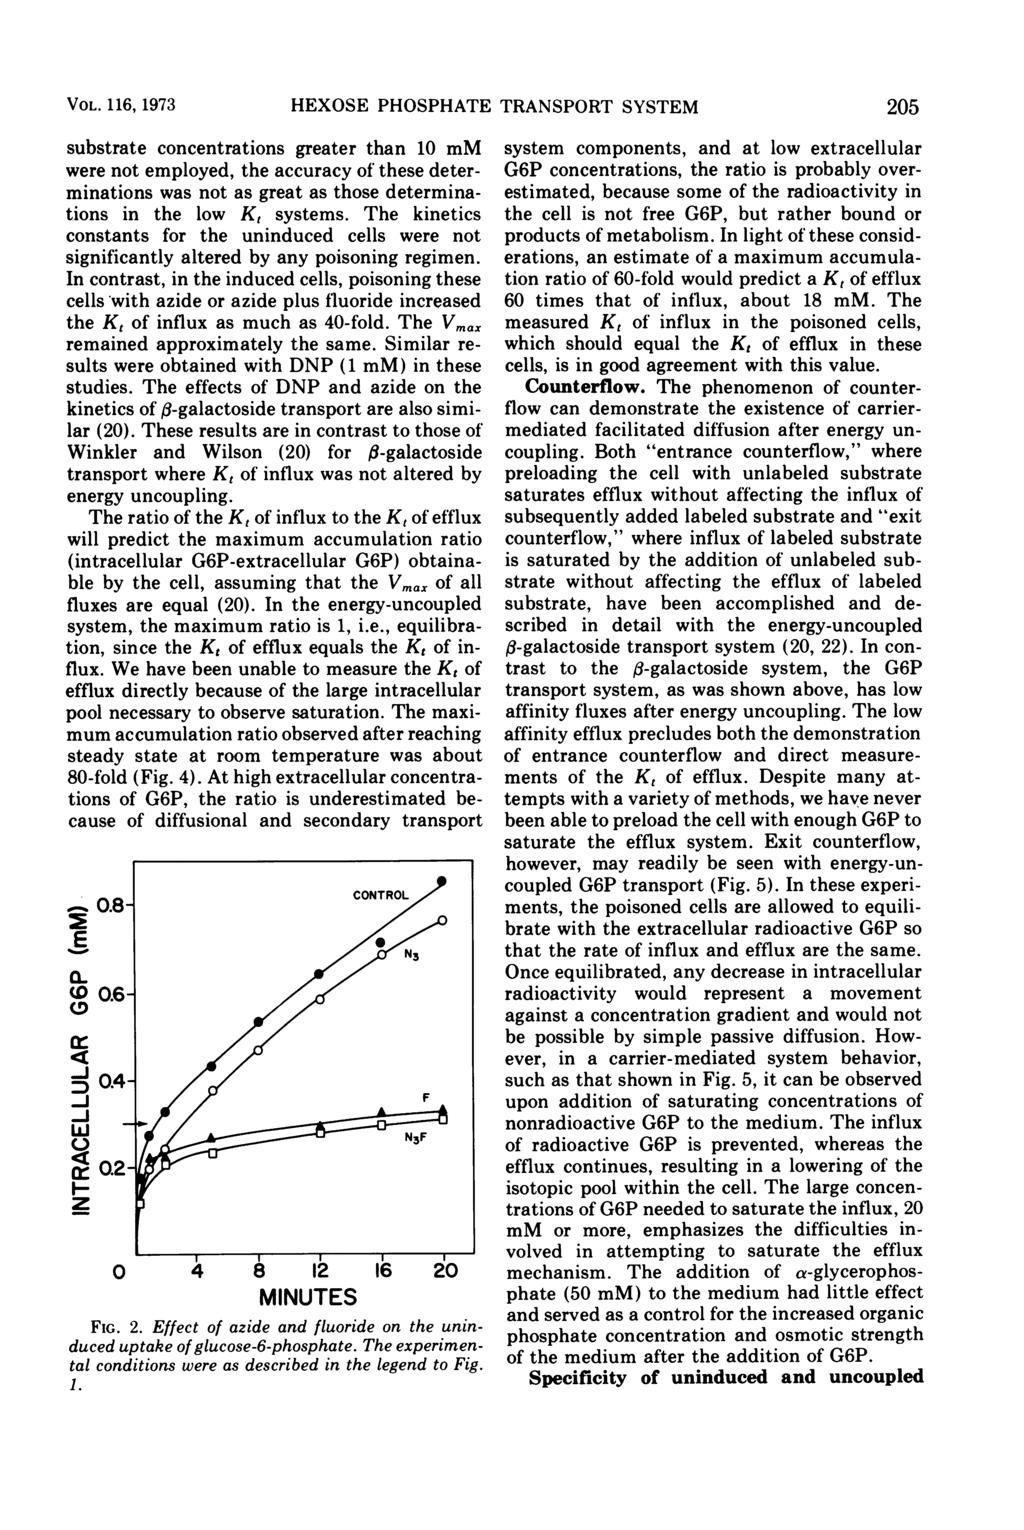 VOL. 116, 1973 HEXOSE PHOSPHATE TRANSPORT SYSTEM 205 substrate concentrations greater than 10 mm were not employed, the accuracy of these determinations was not as great as those determinations in